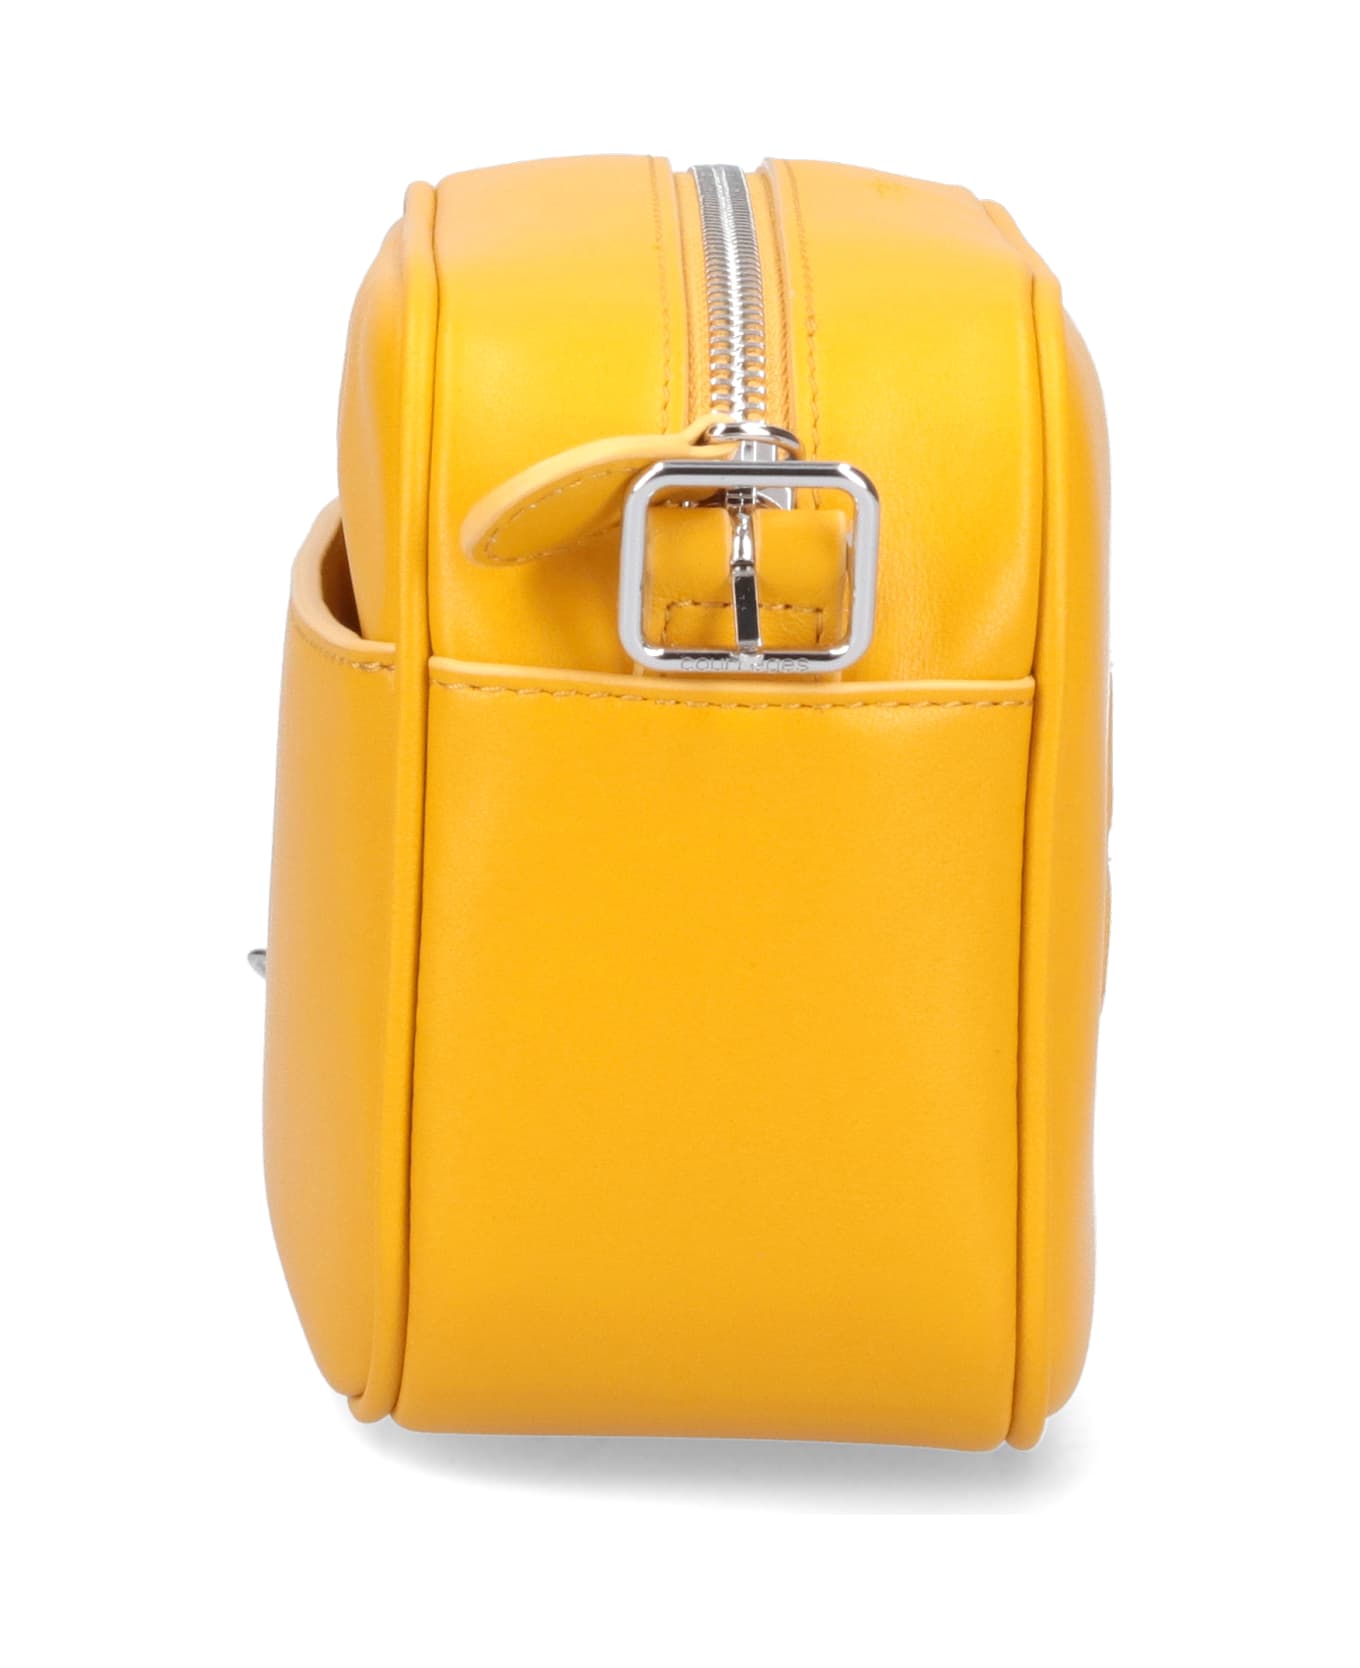 Courrèges "re-edition" Camera Bag - Yellow